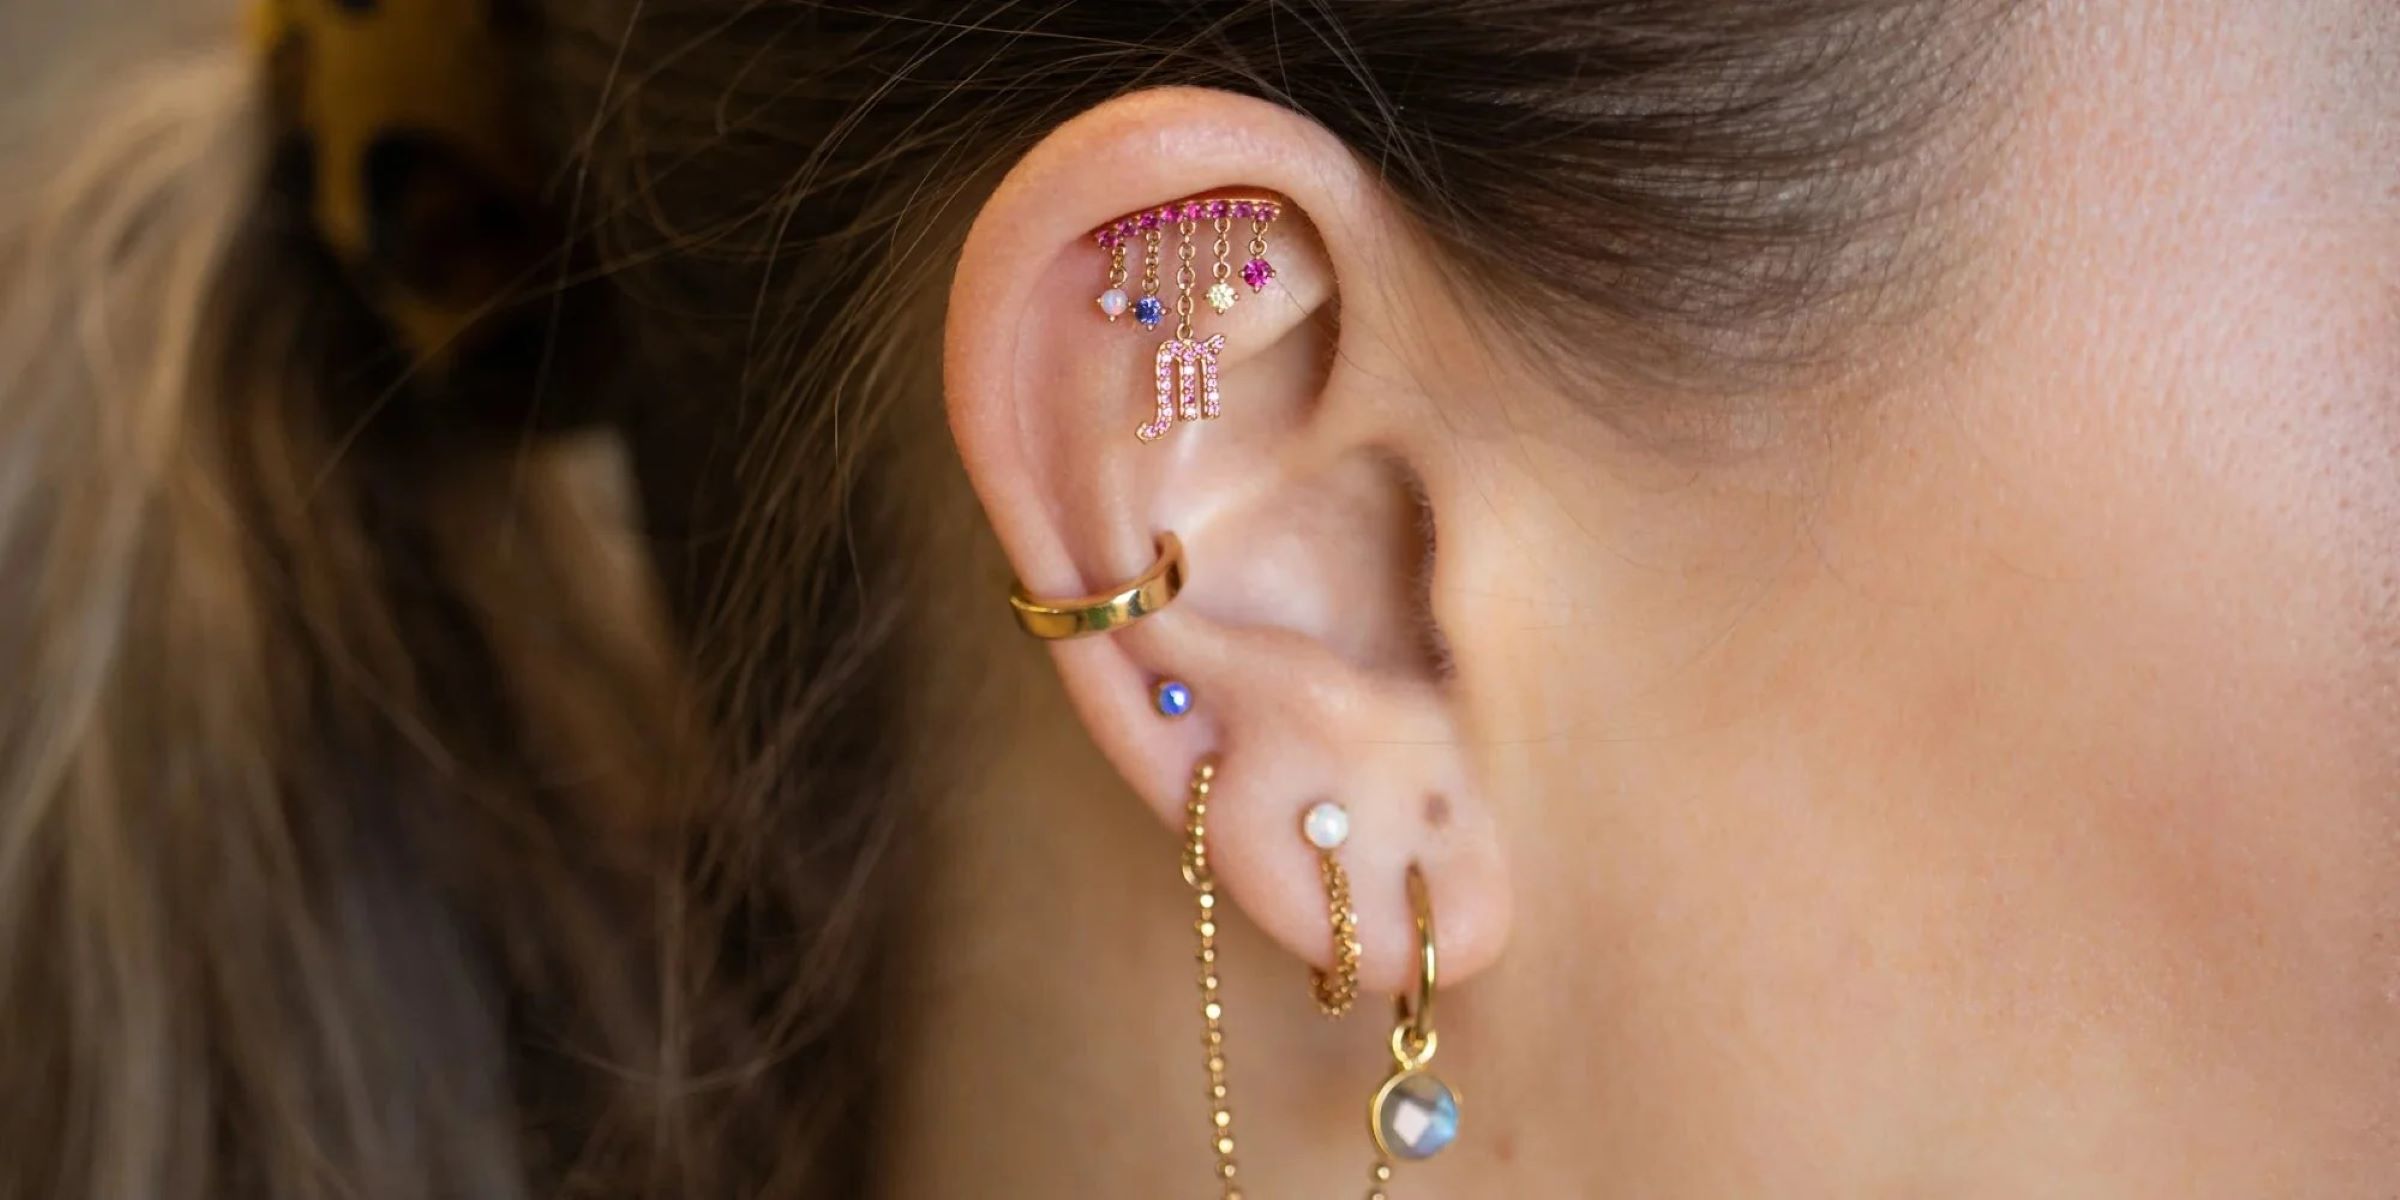 How To Take Out A Cartilage Piercing